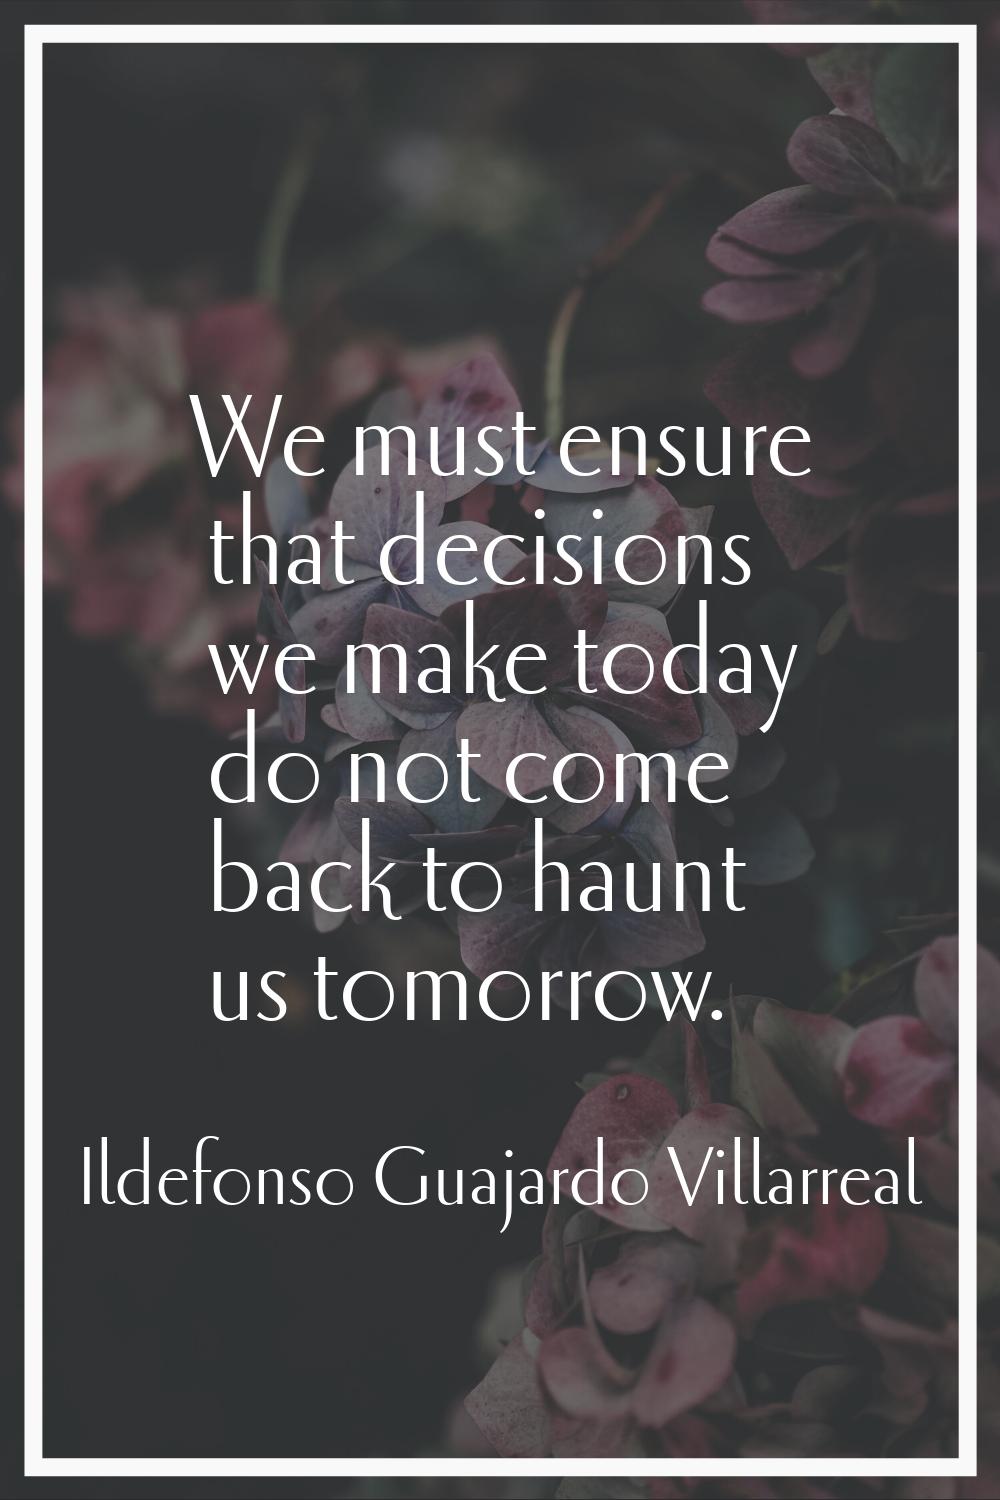 We must ensure that decisions we make today do not come back to haunt us tomorrow.